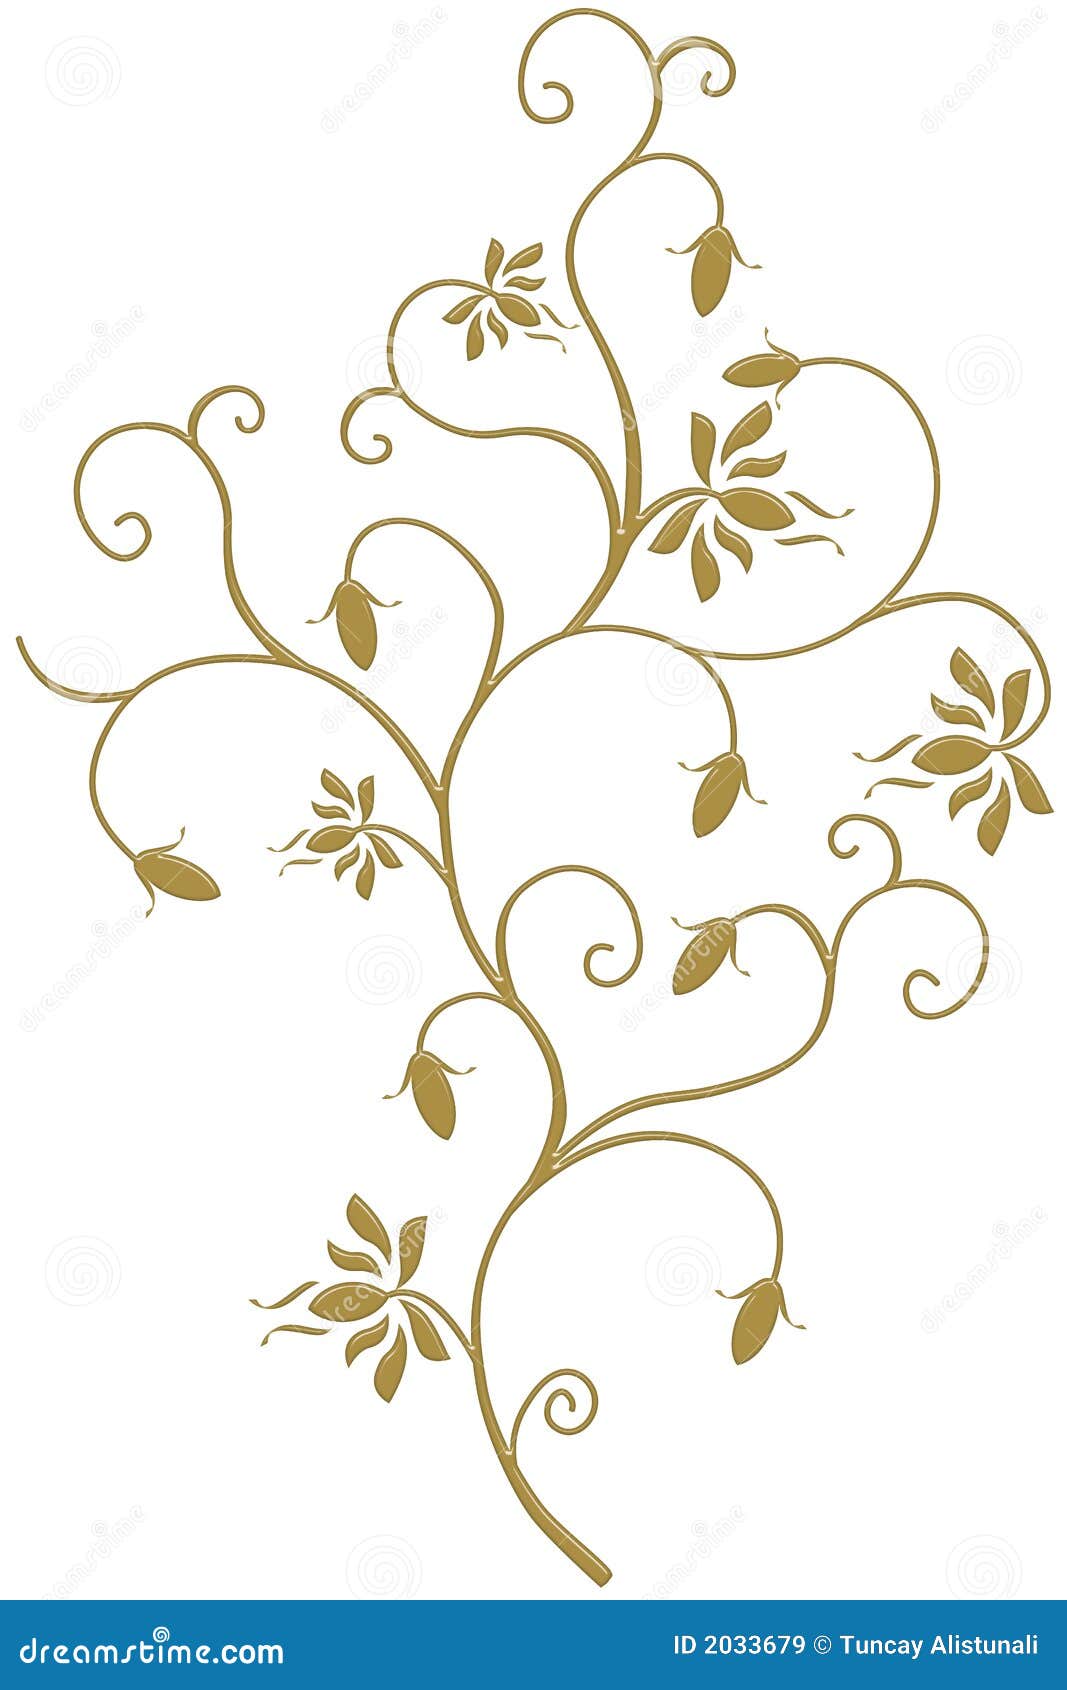 GOLD IVY IS FRAME, DESIGN LOVE Royalty Free Stock Images 